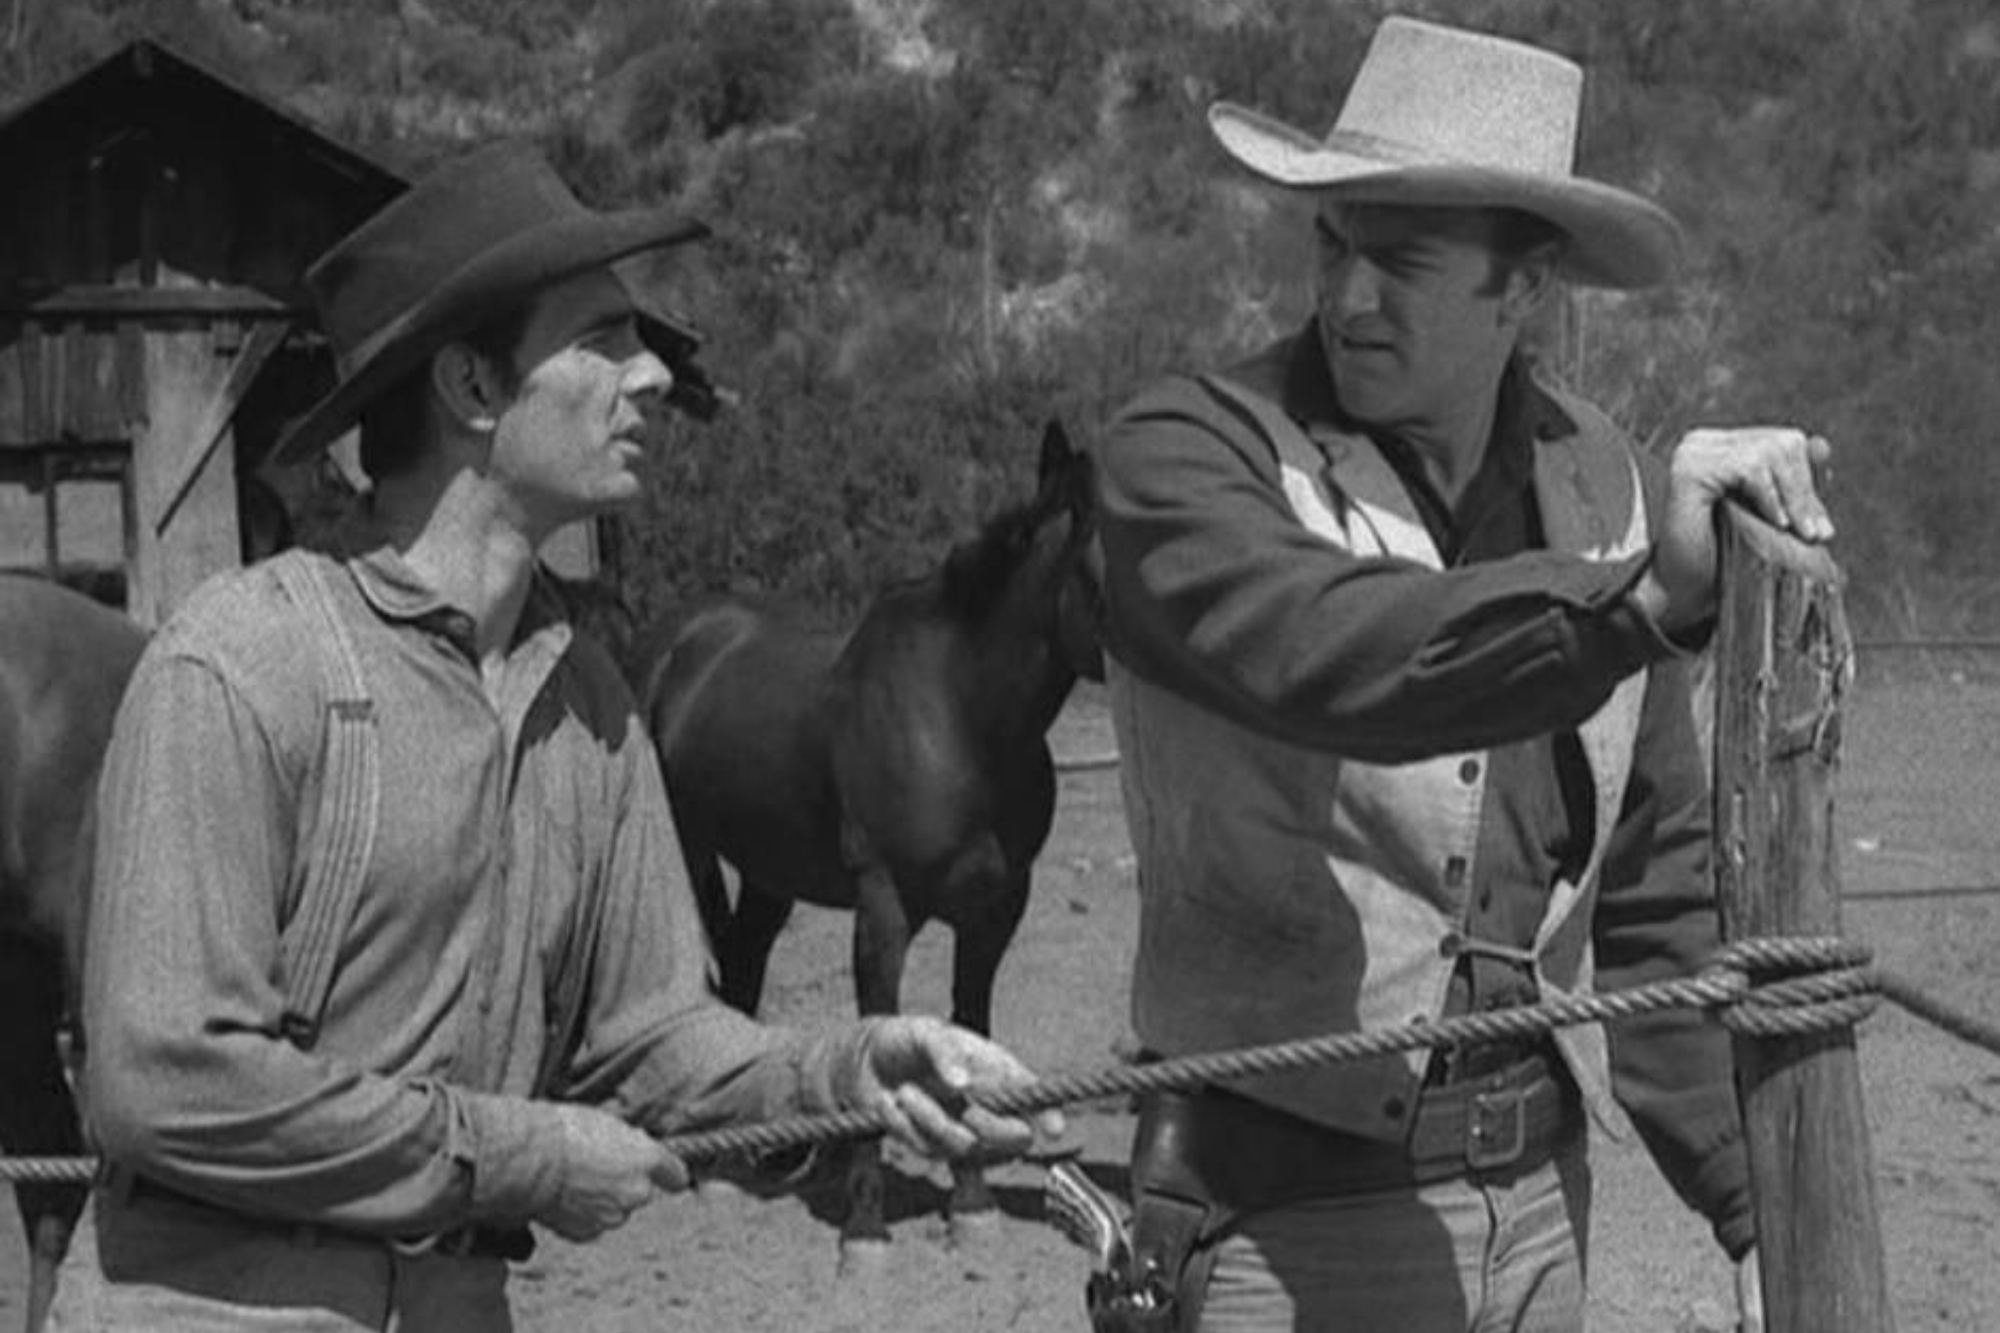 'Gunsmoke' Dennis Weaver as Chester Goode and James Arness as Matt Dillon. Chester is holding onto a rope, while Matt is holding onto the post, looking at him.